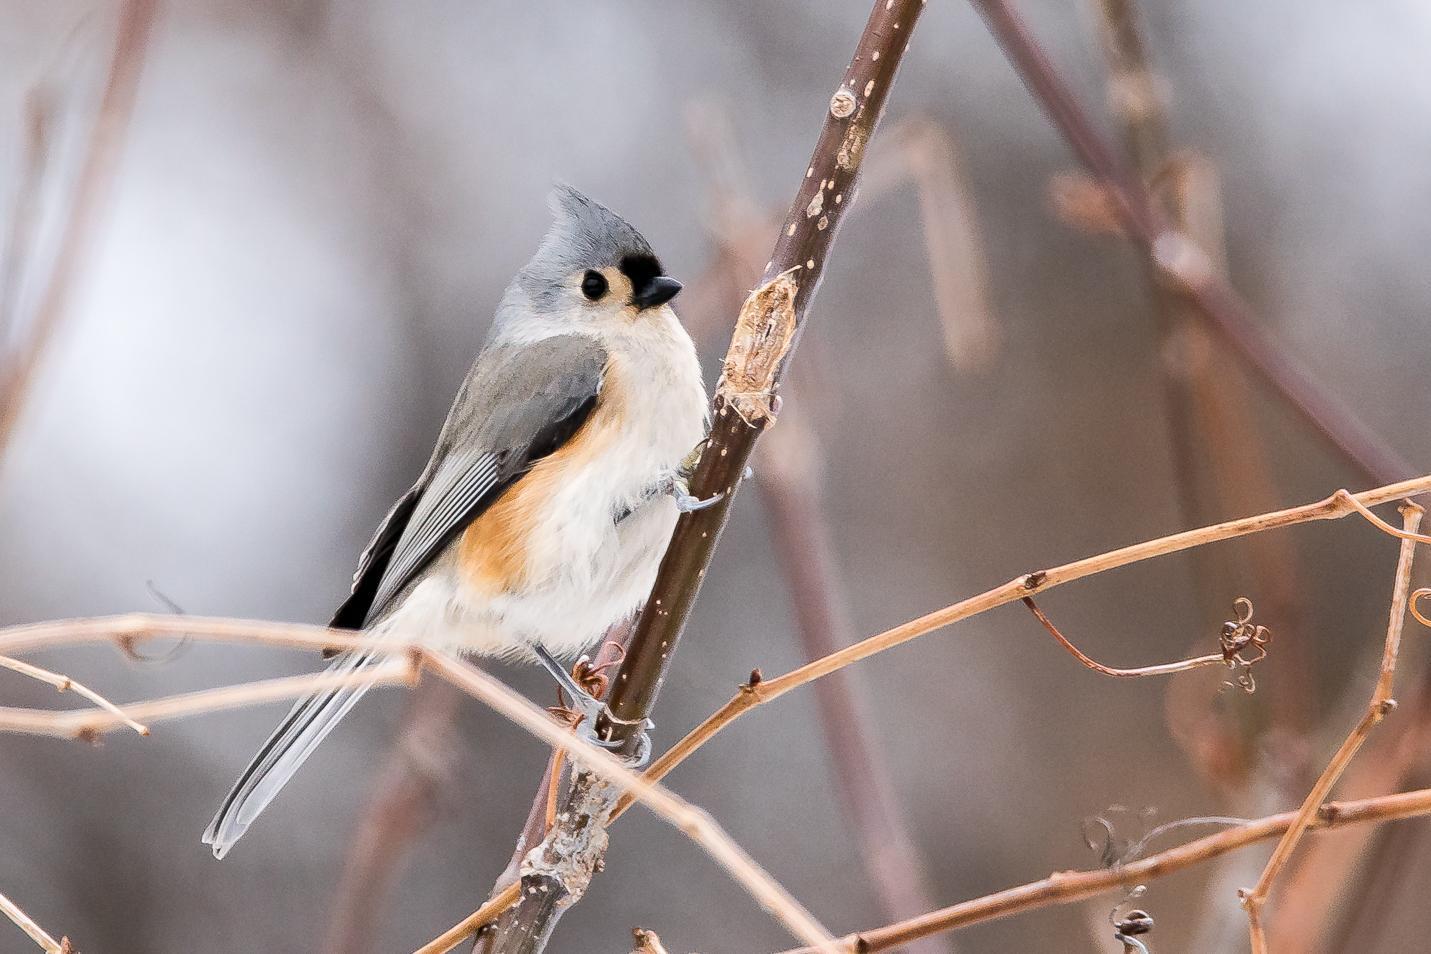 Tufted Titmouse Photo by Gerald Hoekstra